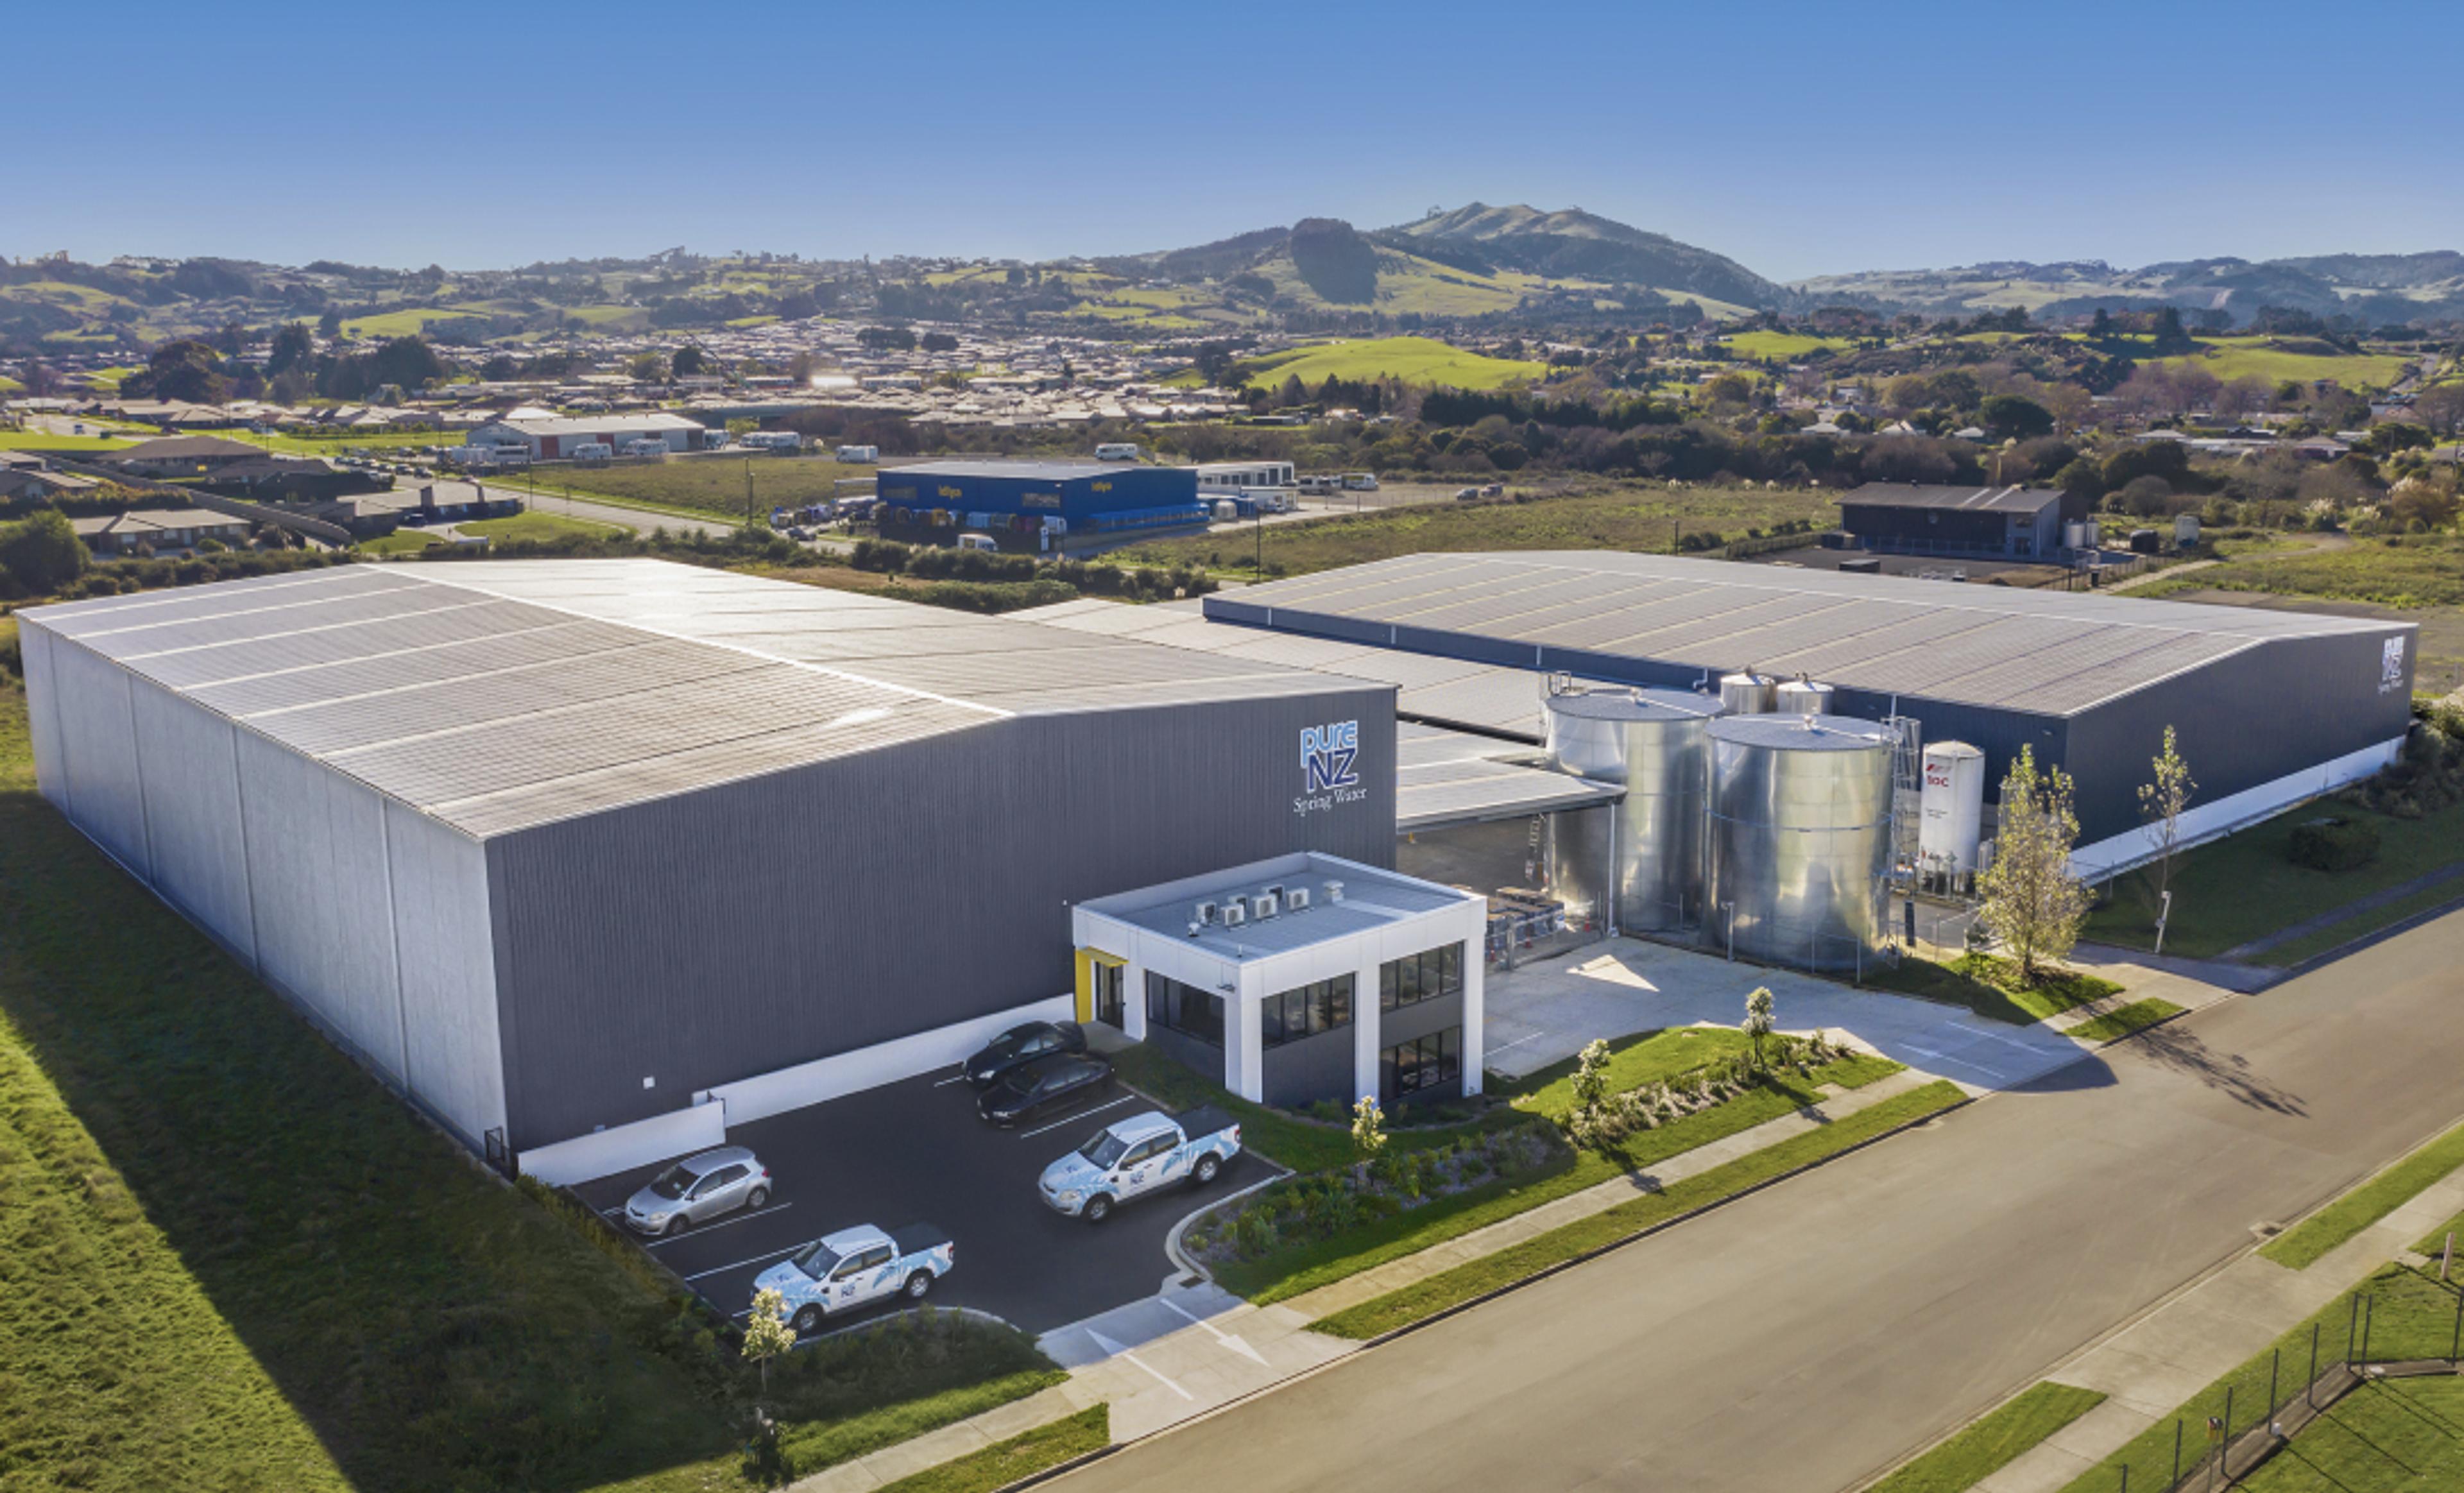 2-4 Yashili Drive is located within the Gateway Business Park in Pōkeno, approximately 50 minutes south of Auckland CBD with excellent logistics access to the golden triangle (Auckland, Hamilton and Tauranga).